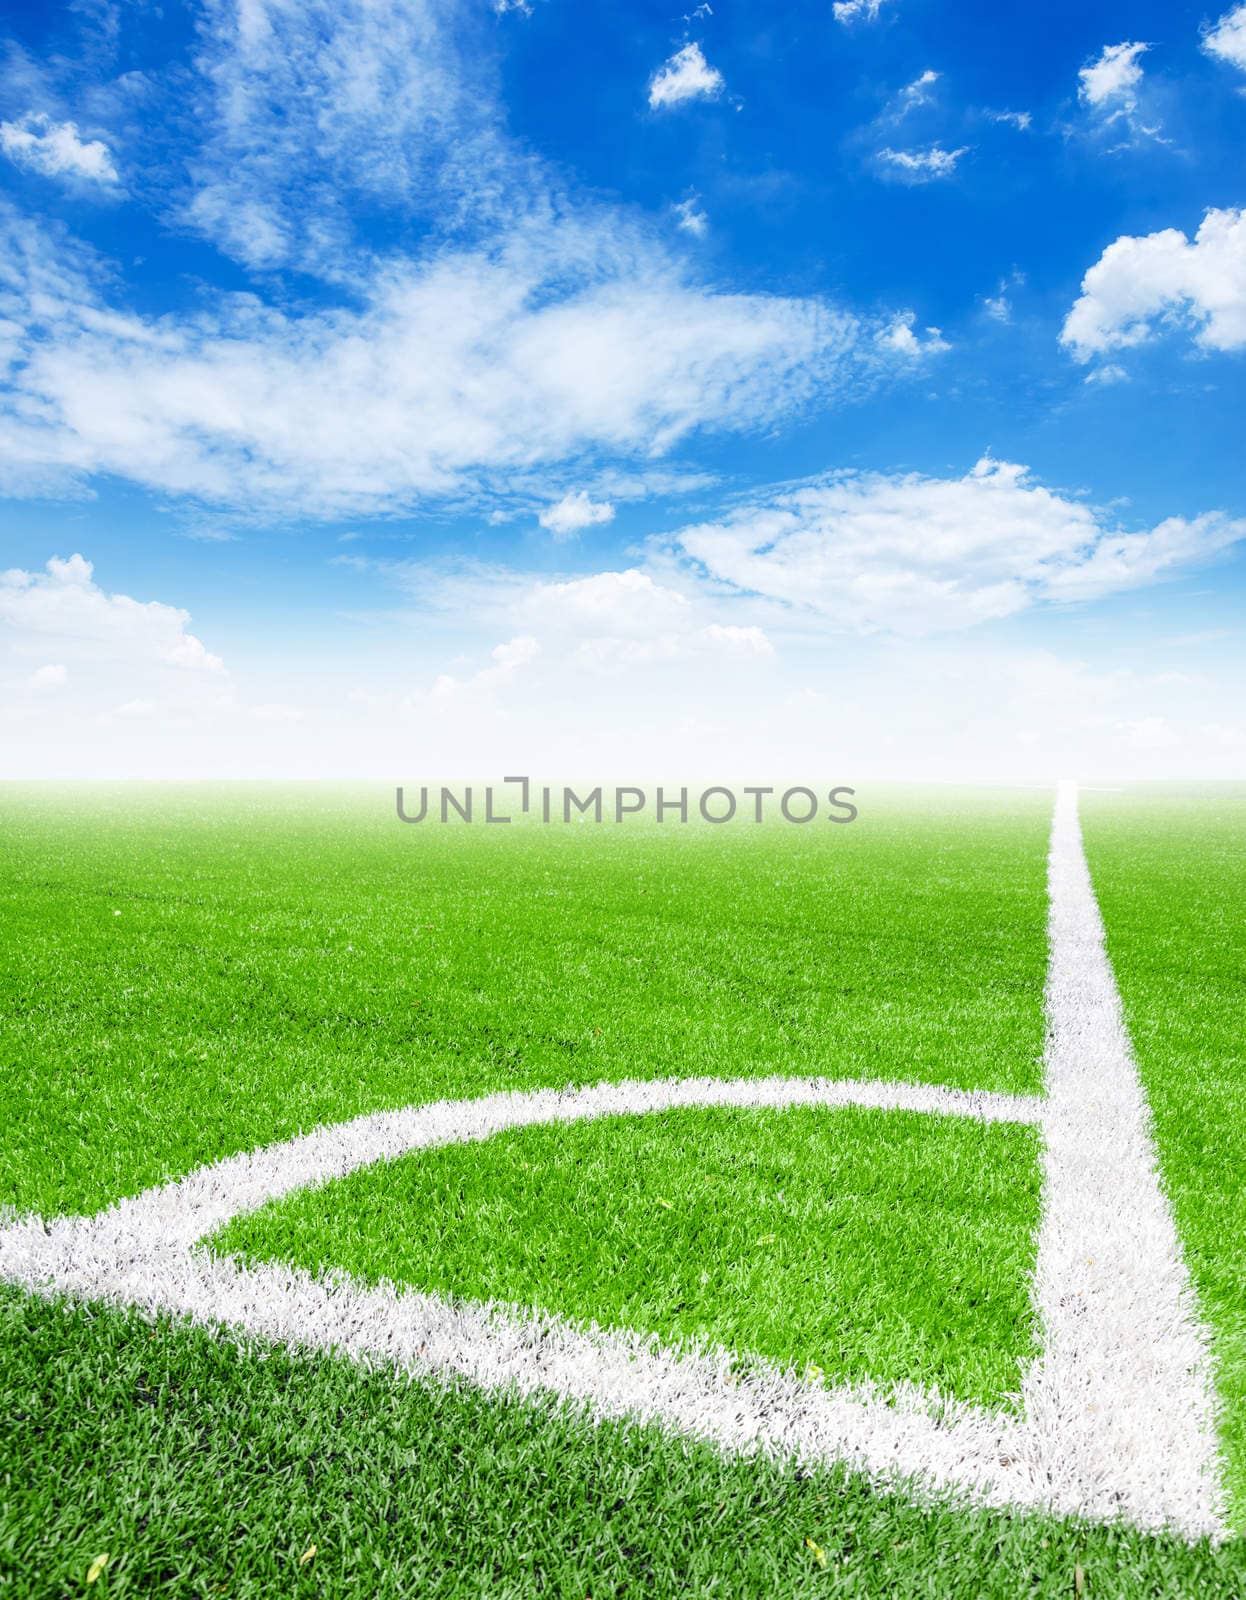 Soccer ball in corner kick position with blue sky.